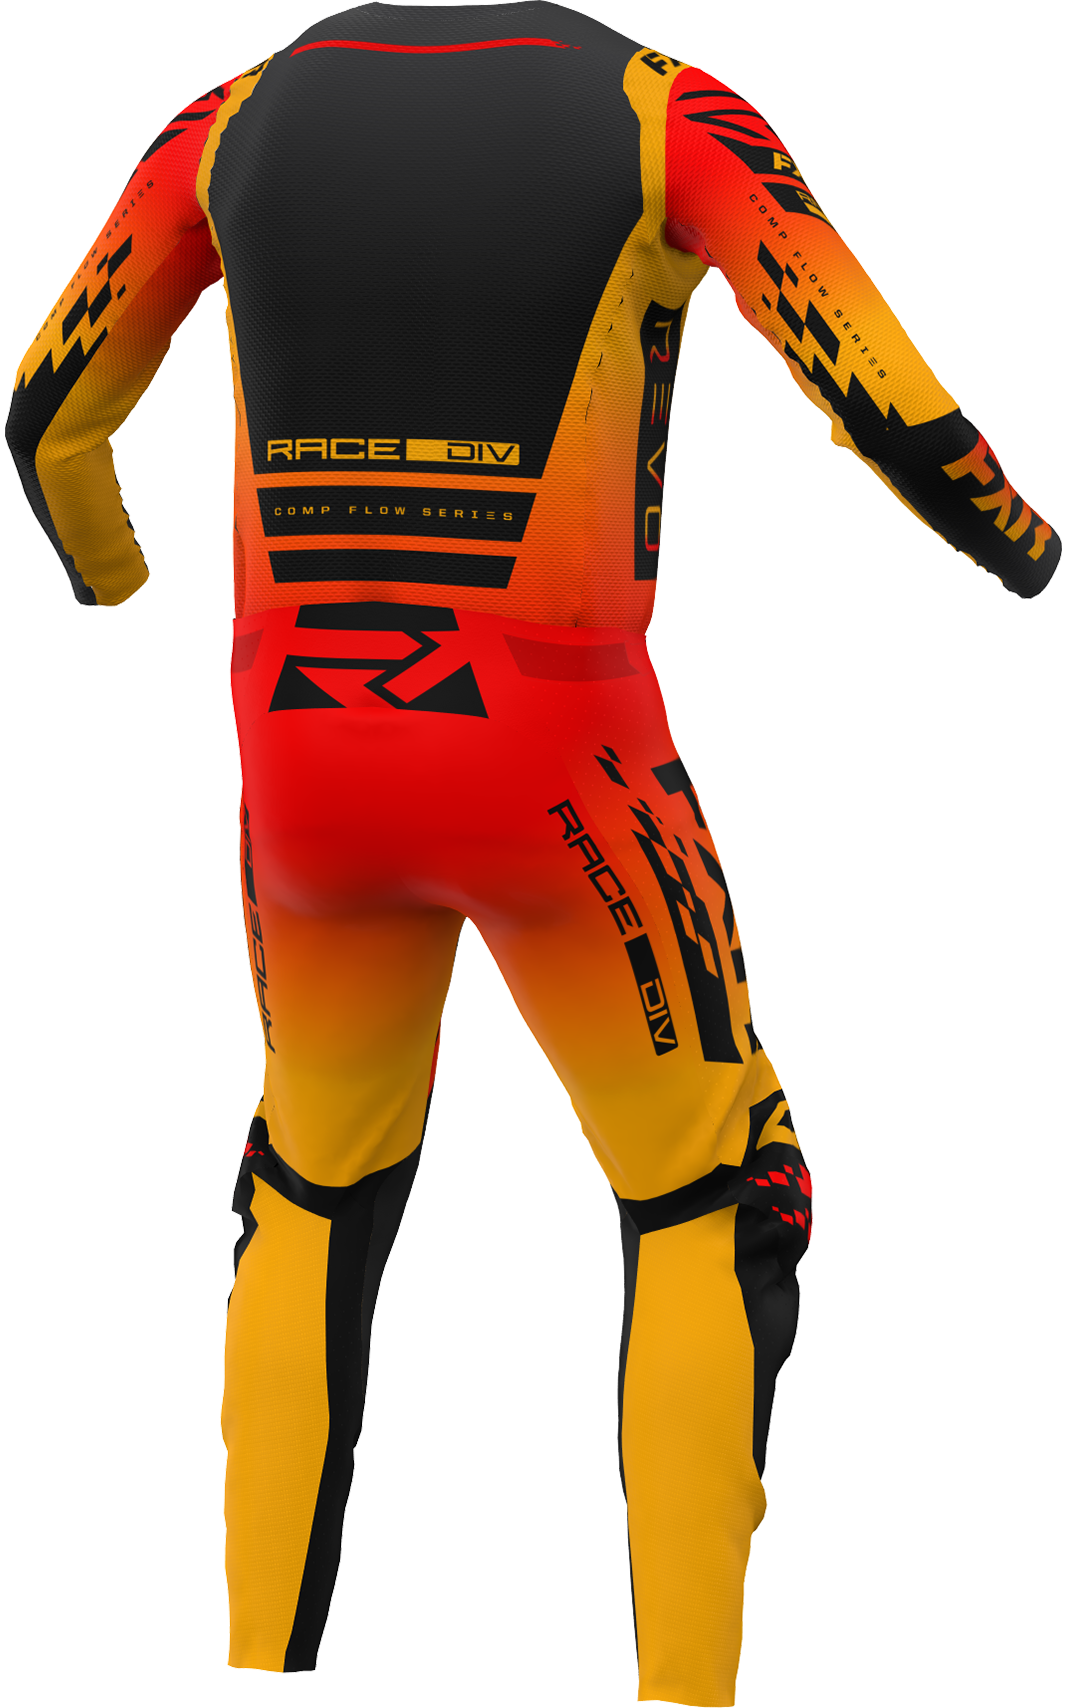 A 3D image of FXR's Revo Comp MX Jersey and Pant in Tequila Sunrise colorway